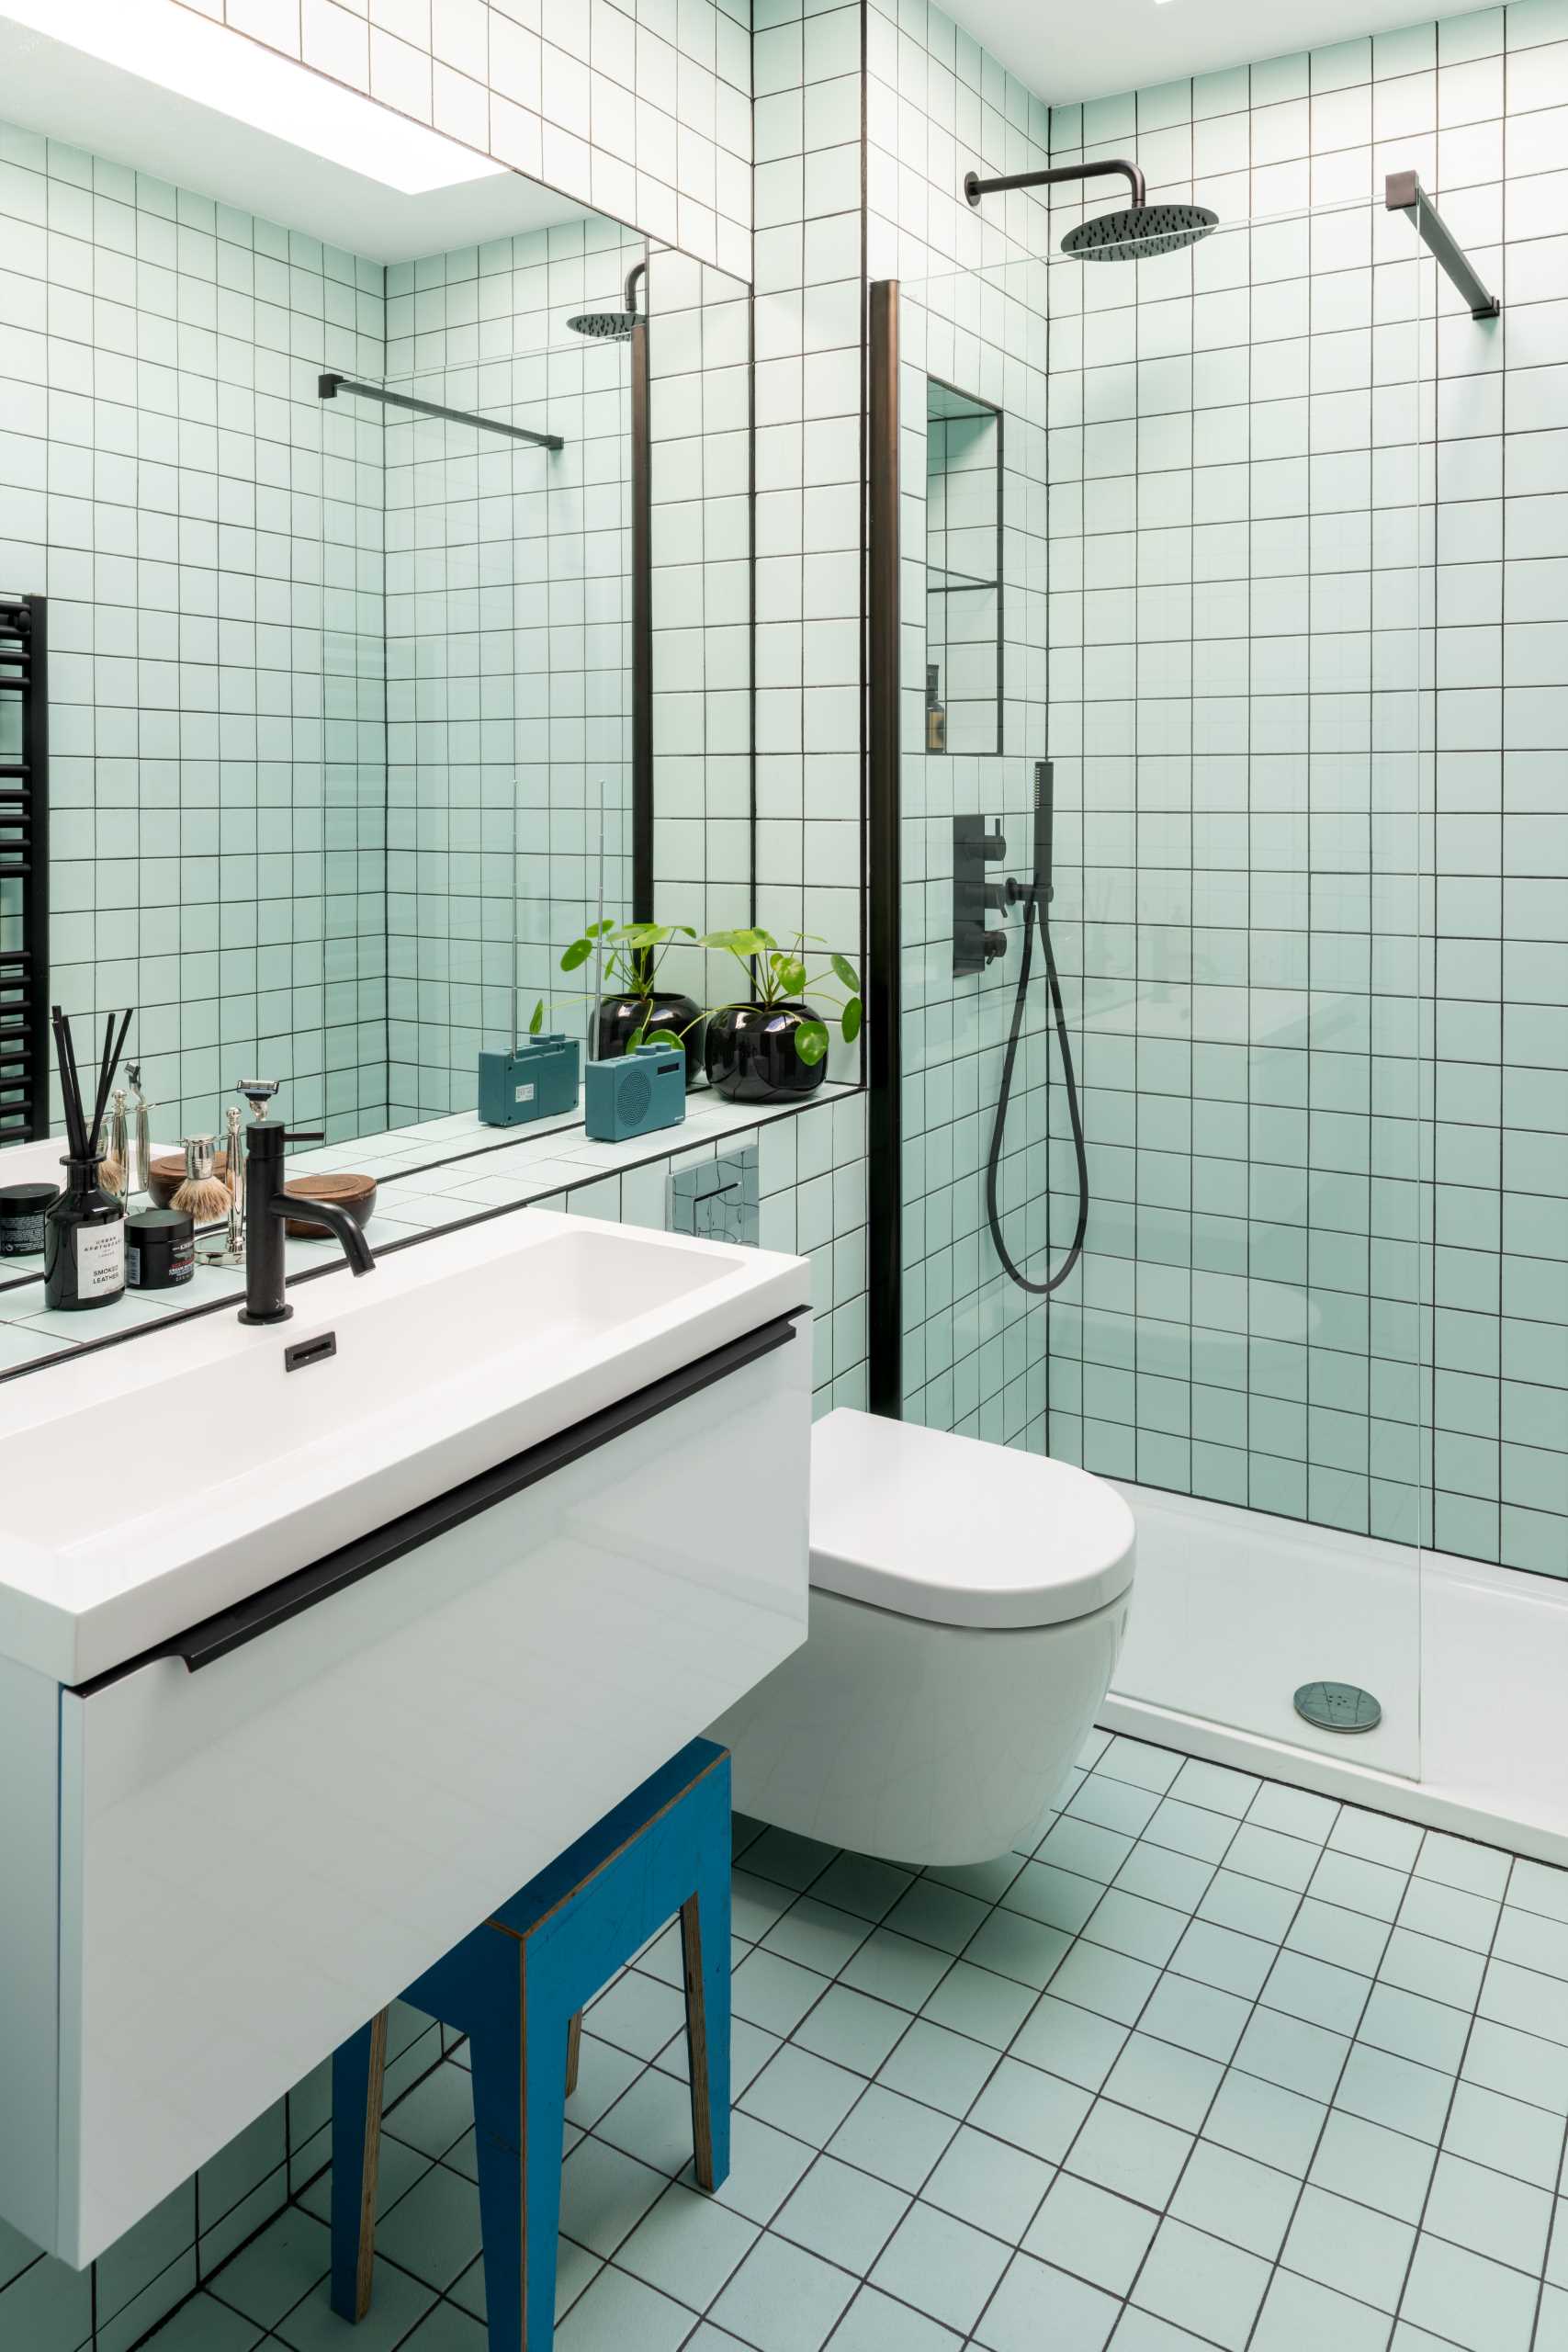 In a bathroom, square tiles cover the walls and floor, while black accents provide a contrasting element.